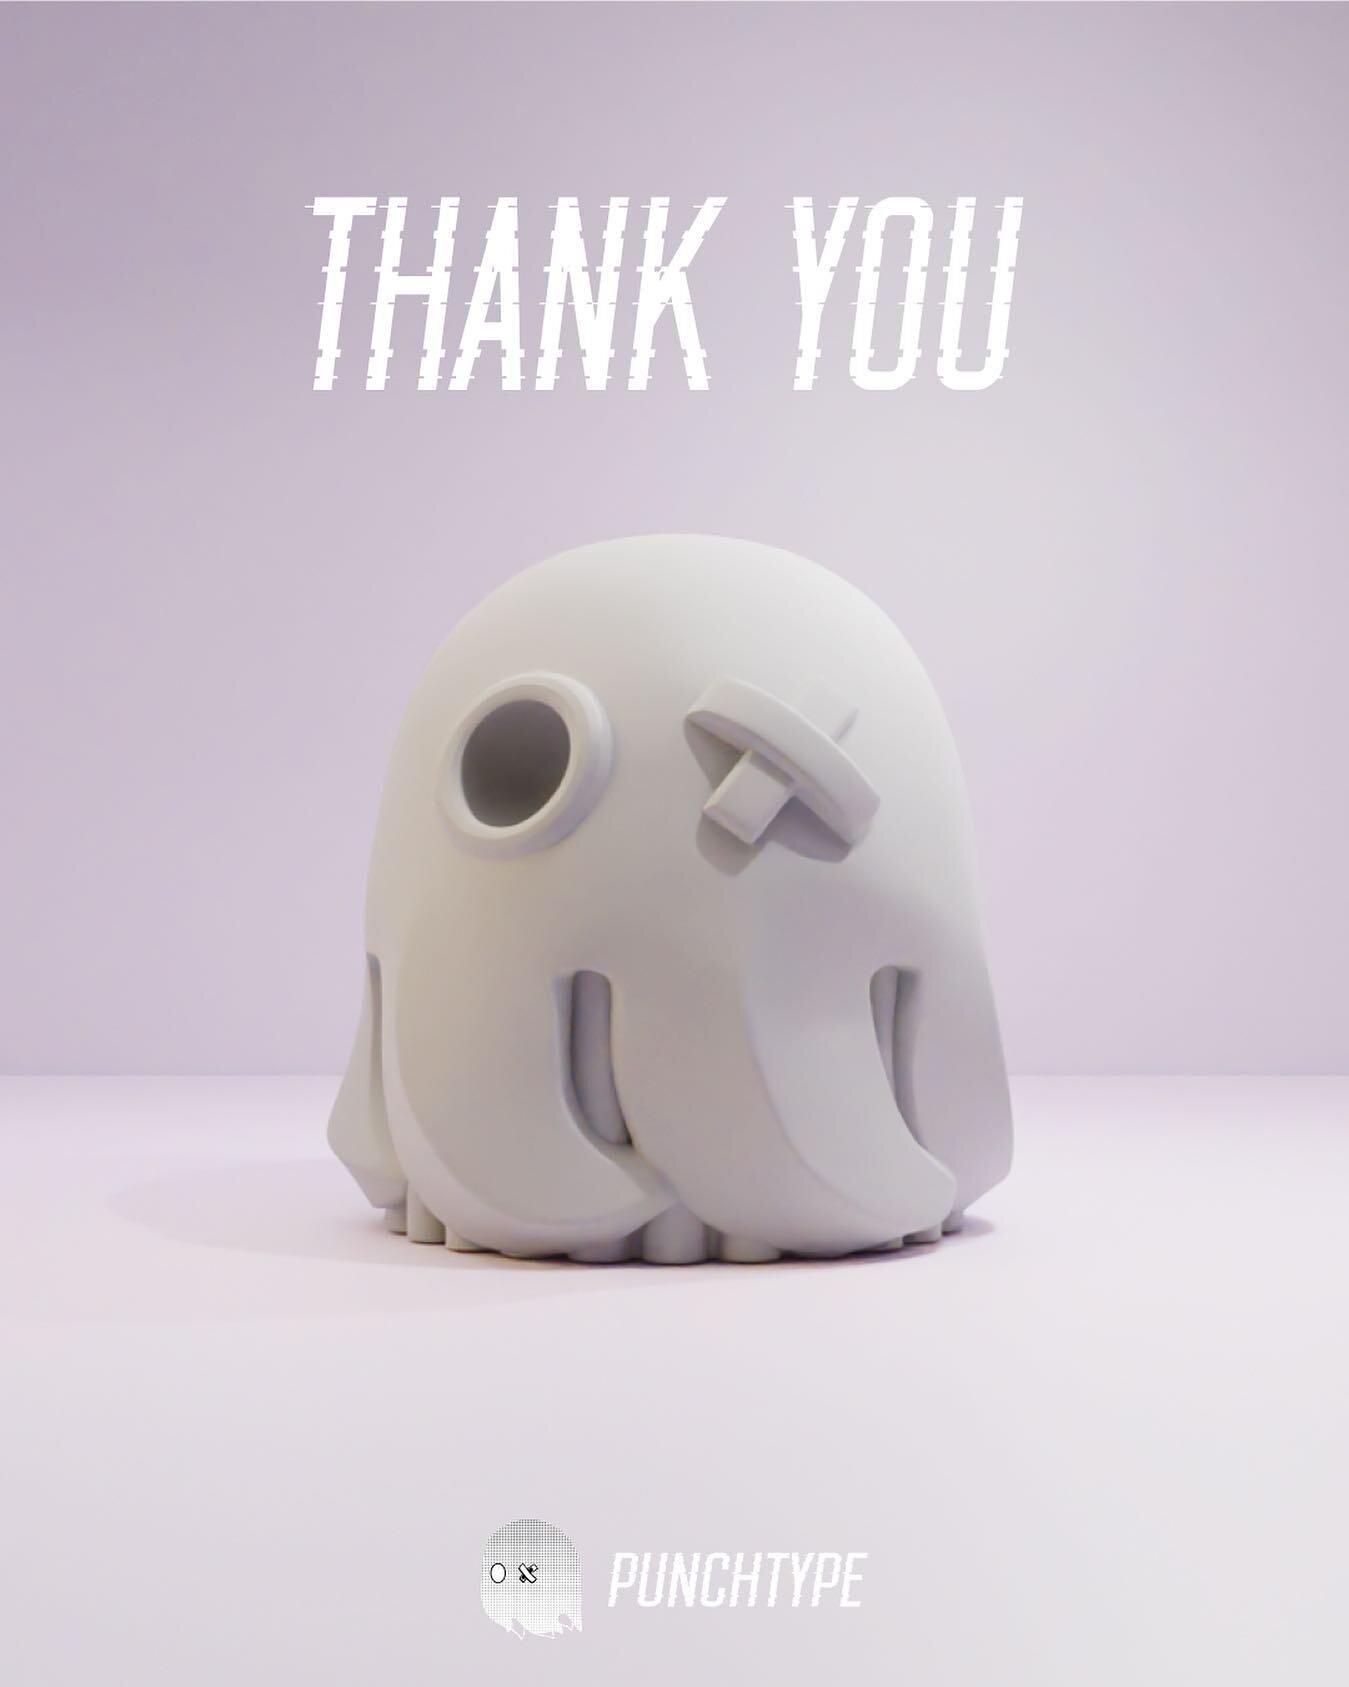 THANK YOU FOR AN AMAZING LAUNCH 👻 the responses have been fantastic so far and we&rsquo;ve got something for you ghosties. We&rsquo;ve created a spoo-key 👻 use code: THANKYOU15 for 15% off any cap and encoder.

⚡️BE FAST ⚡️ when it&rsquo;s gone it&